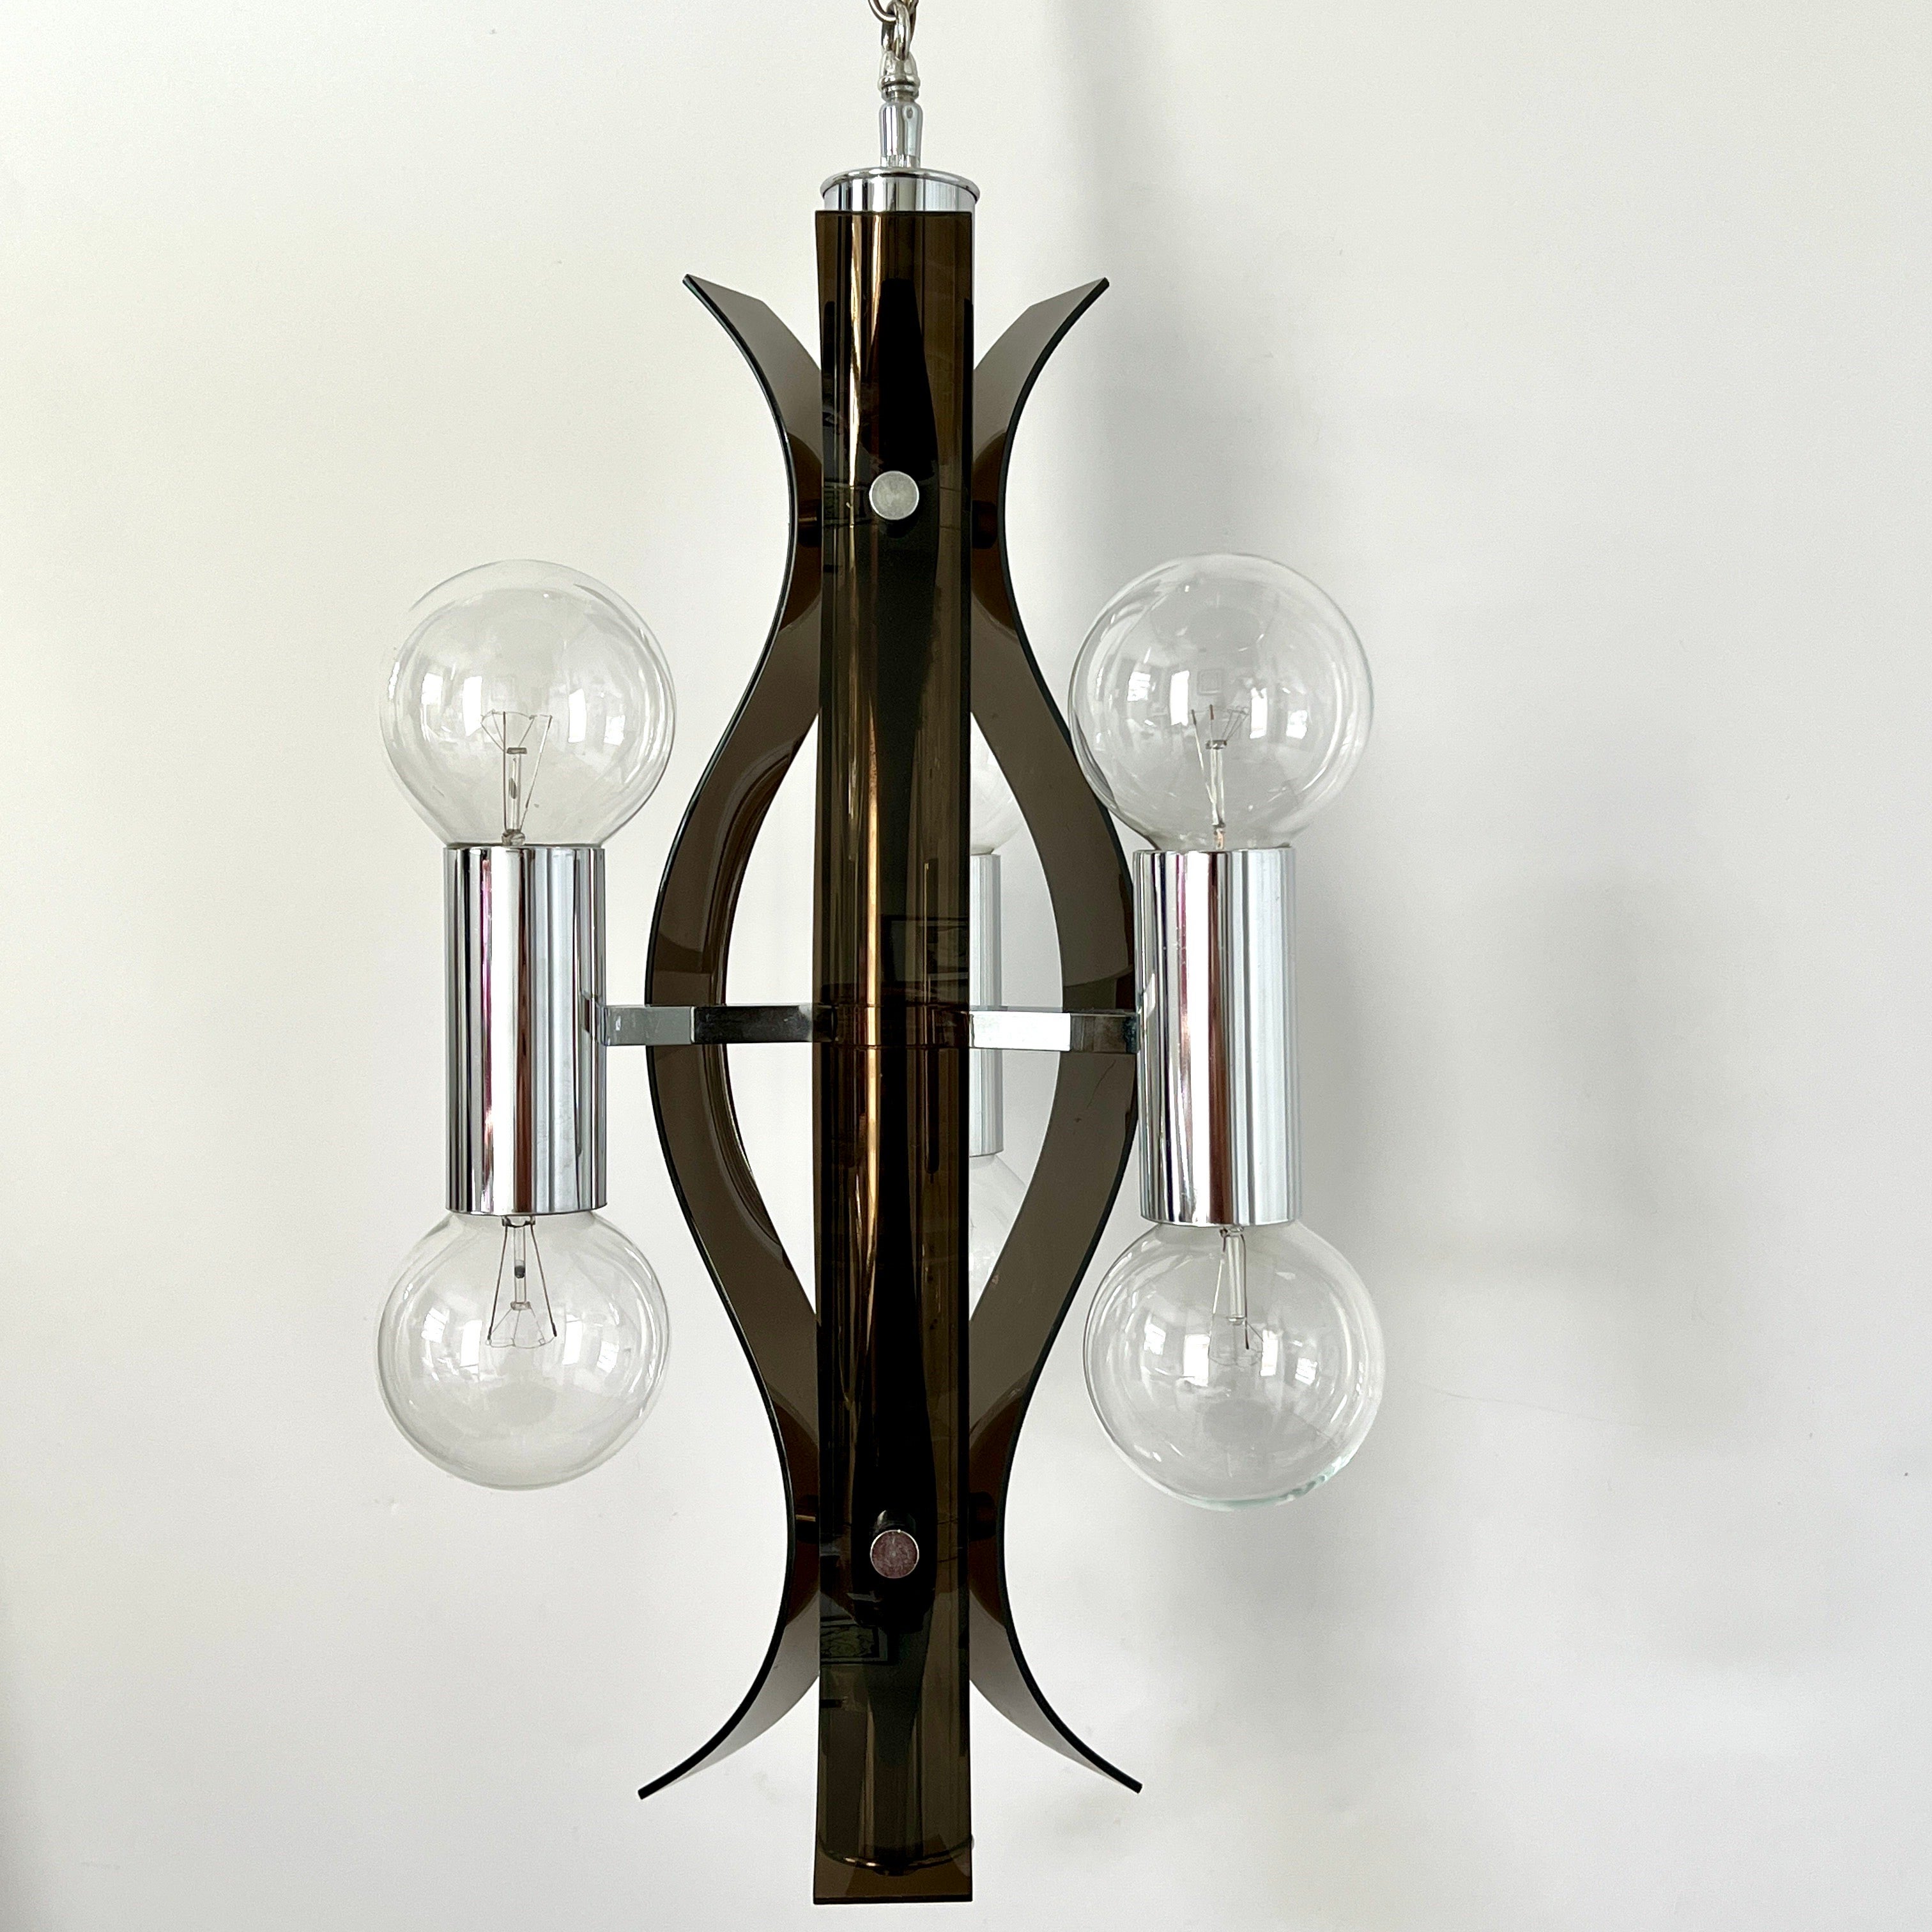 Mid-century modern sculptural chandelier in chrome and smoked lucite attributed to Robert Sonneman. Fixture has three sided design and features dark gray lucite scrolls with chrome cylinders and stud accents.  Fitted with six lights, three uplights